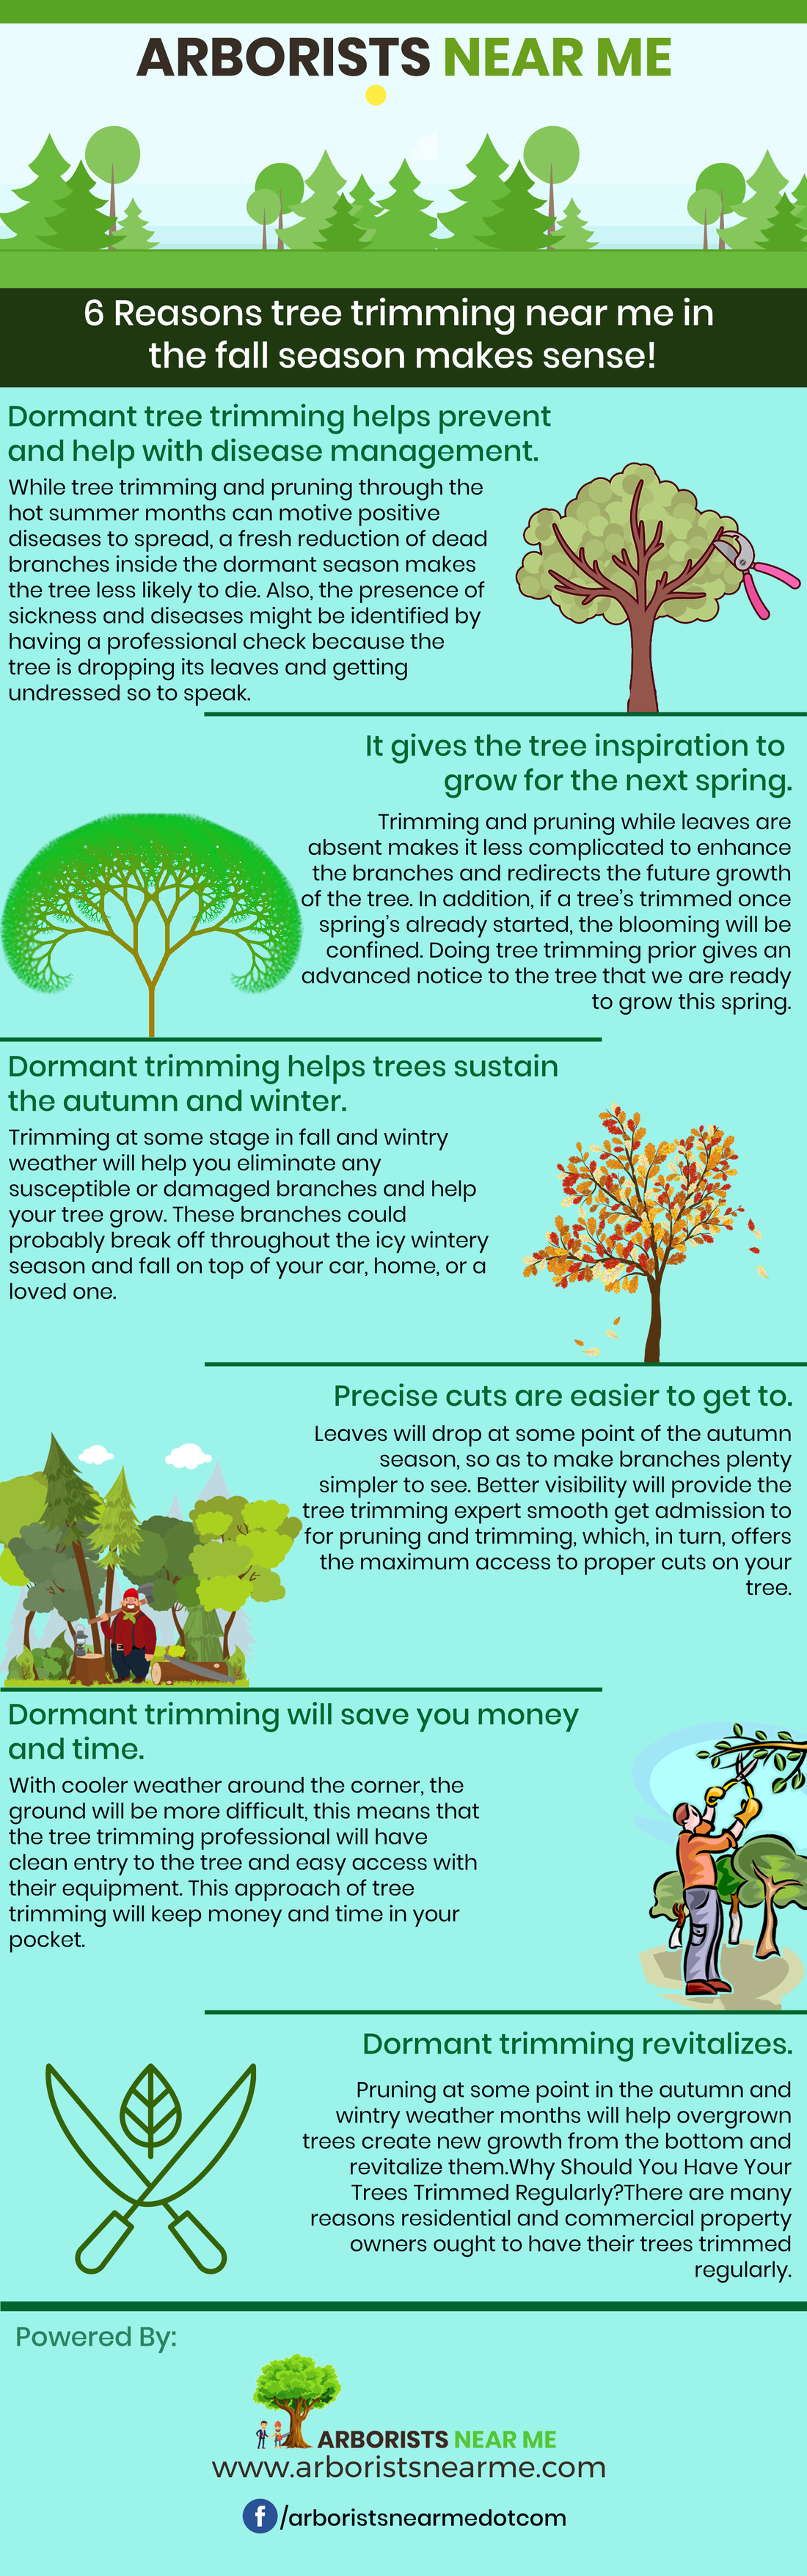 6 Reasons why tree trimming in the fall makes sense! (WHY FALL?)